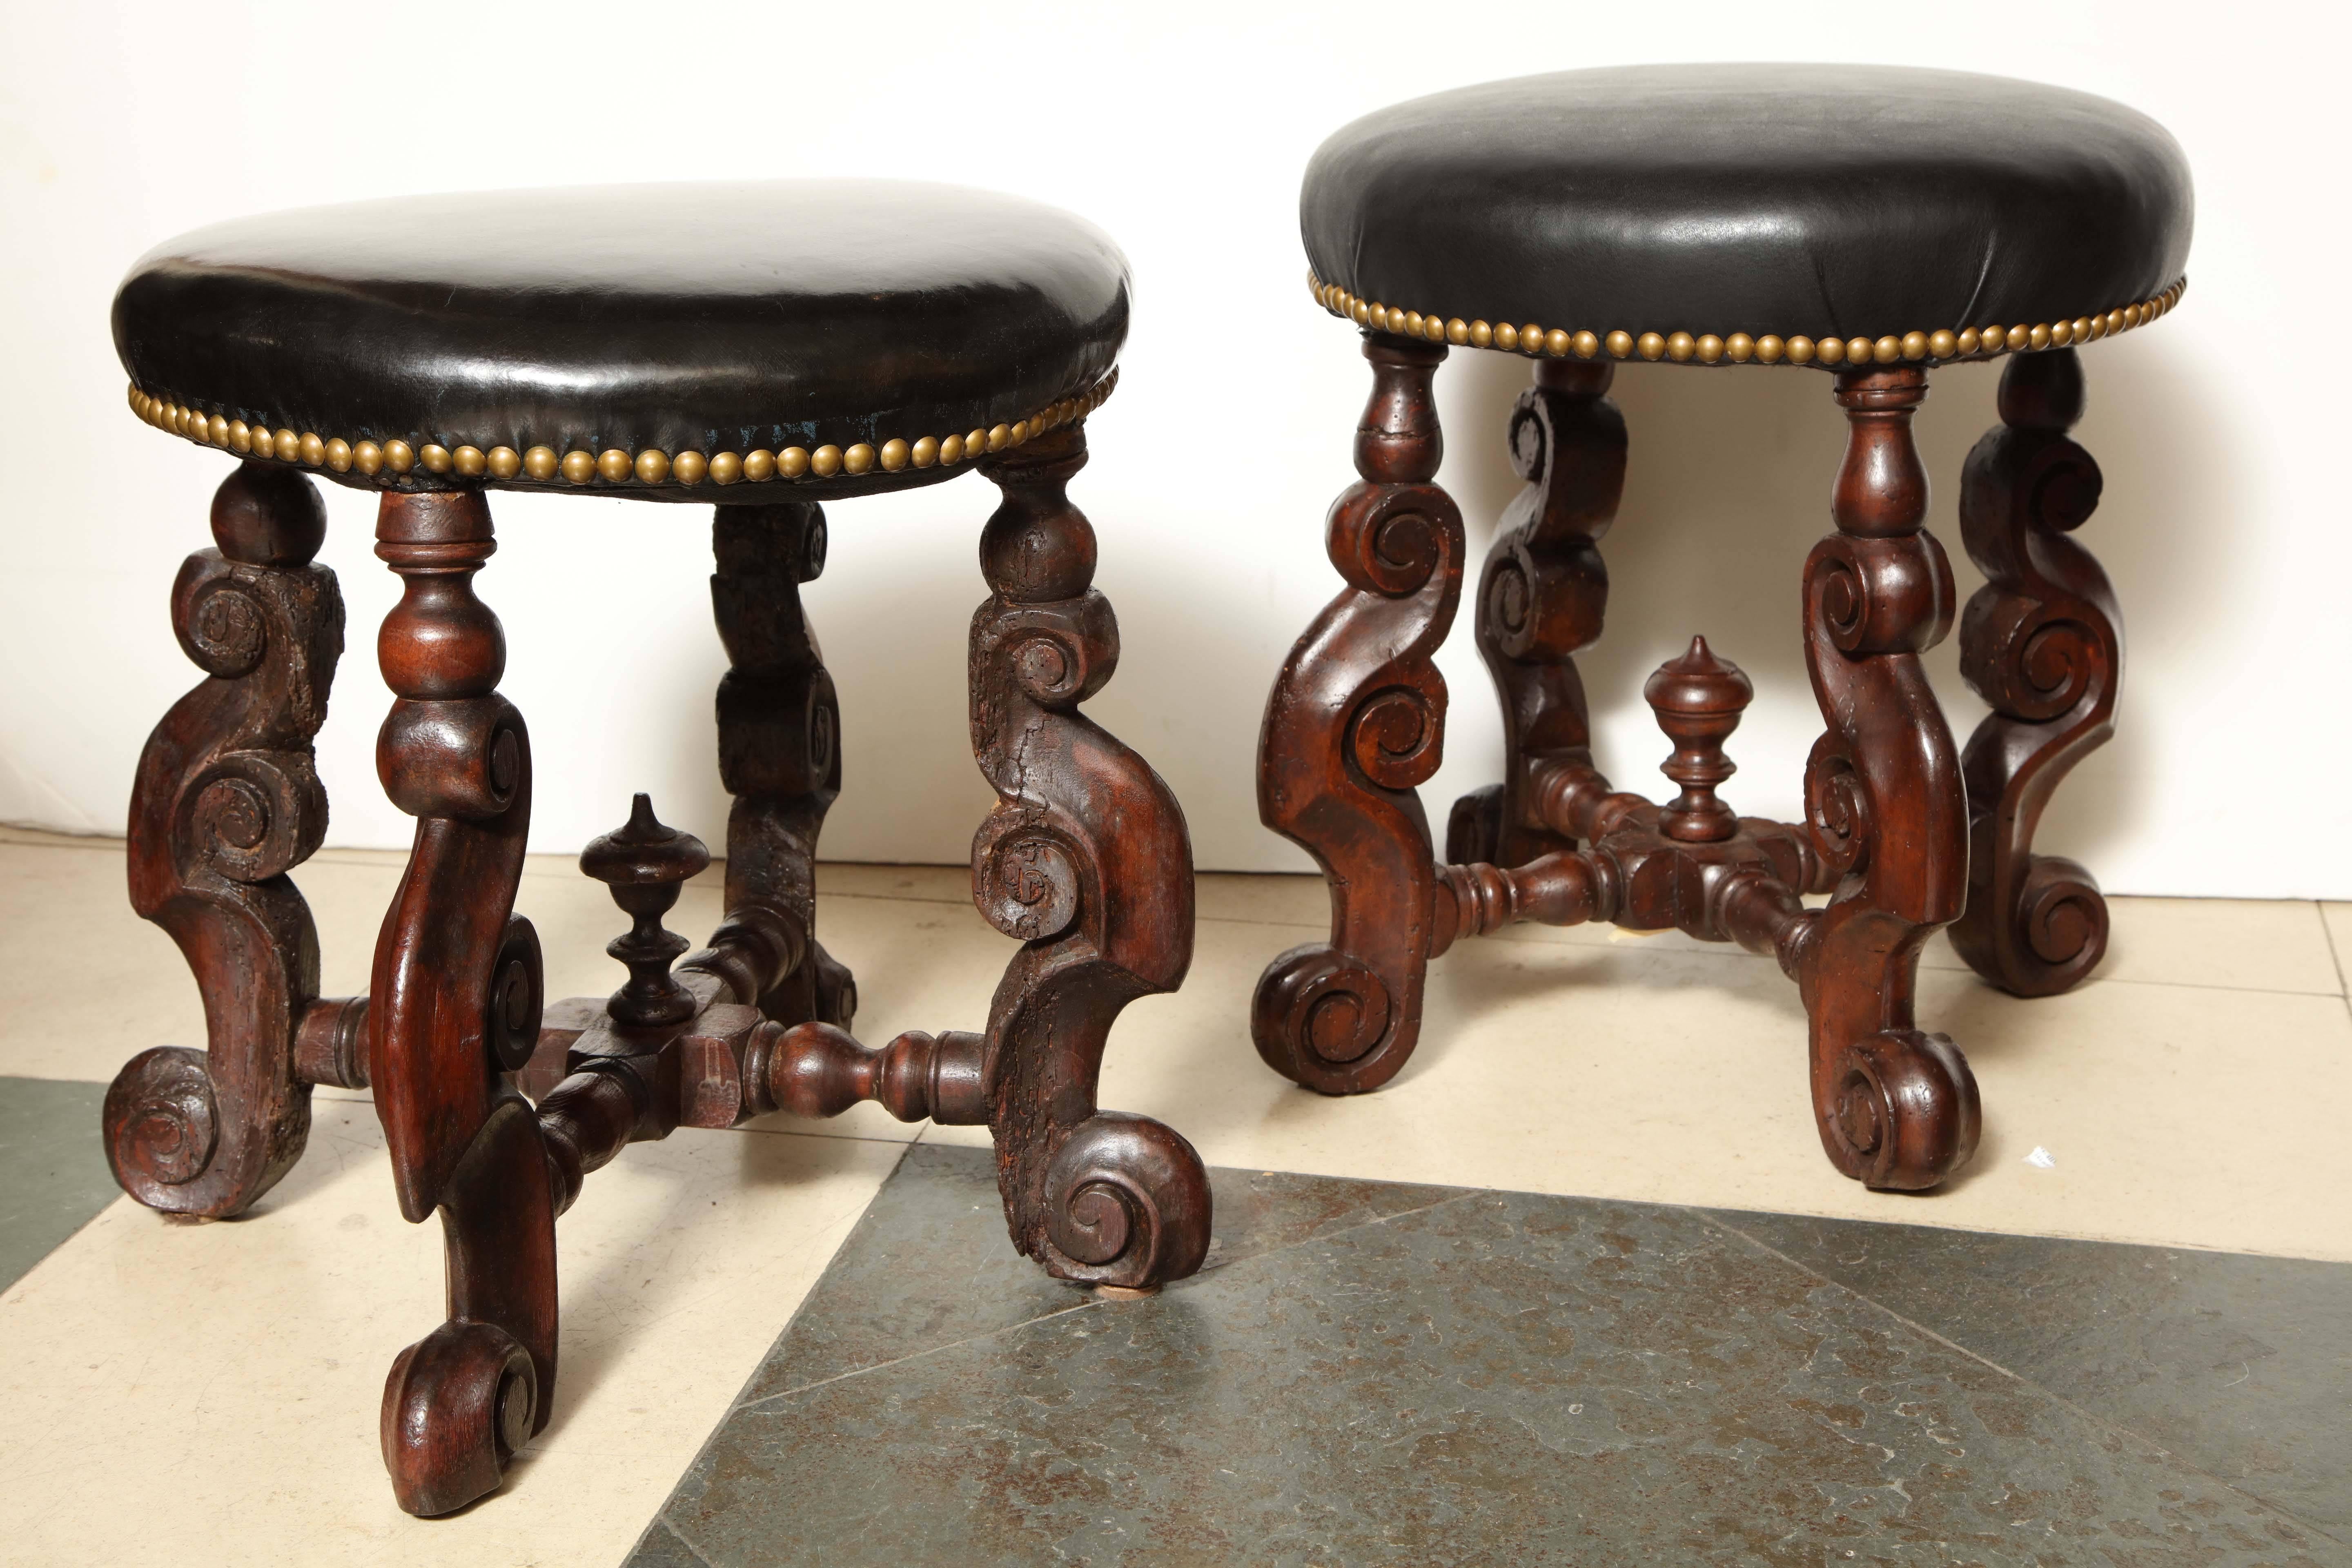 A rare pair of William and Mary carved walnut stools with round leather upholstered cushions.